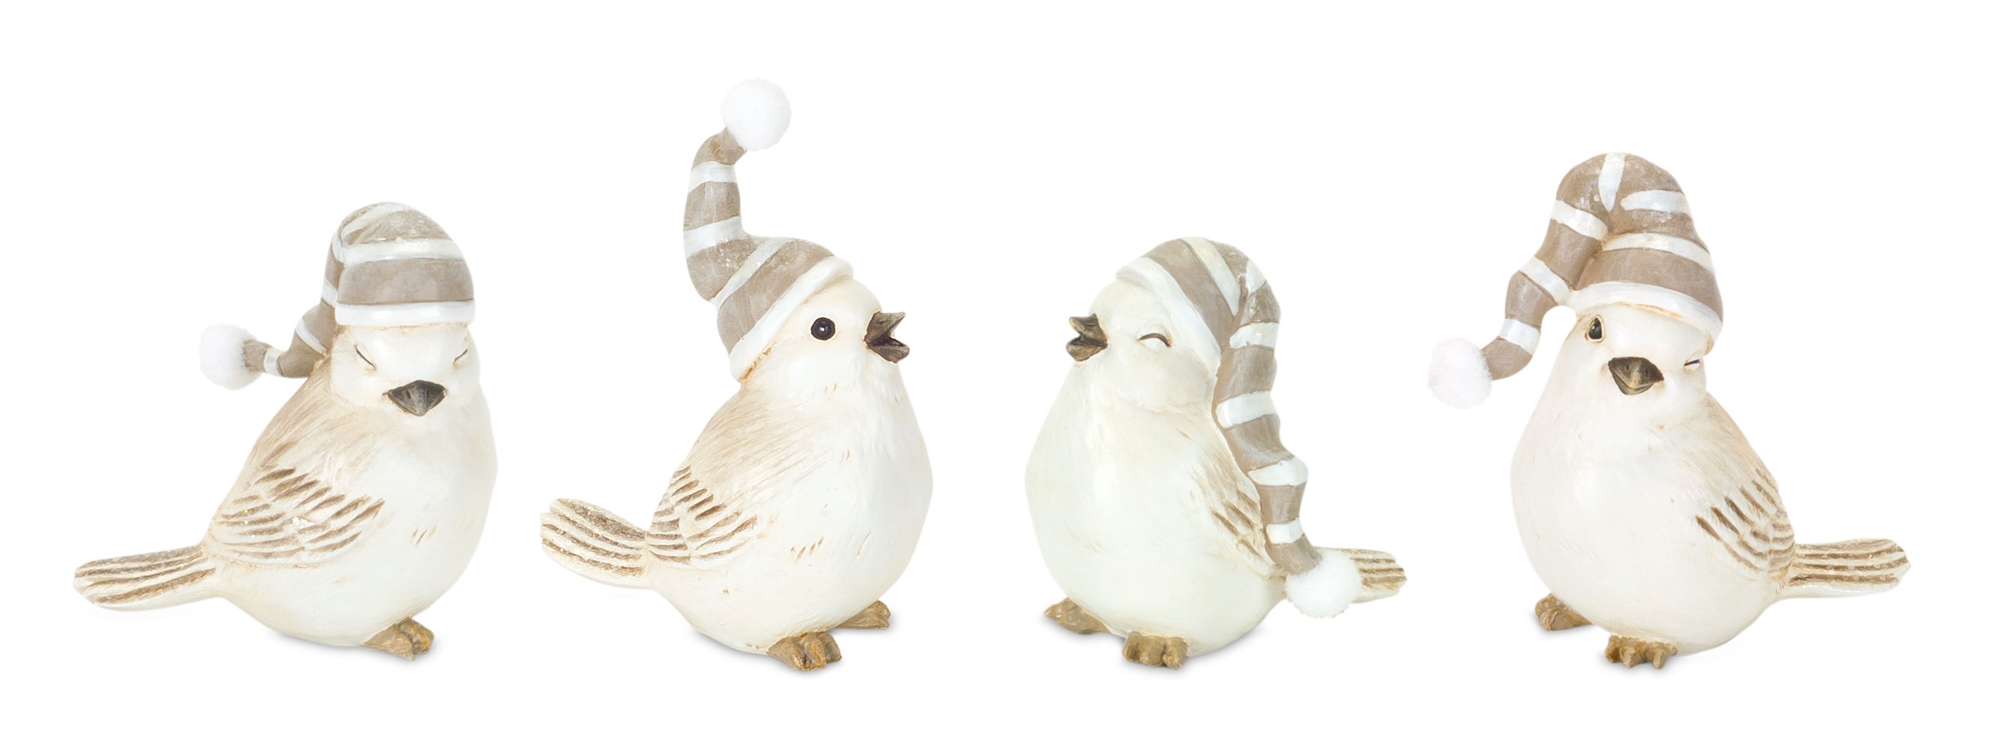 Bird with Hat (Set of 12) 3"H Resin